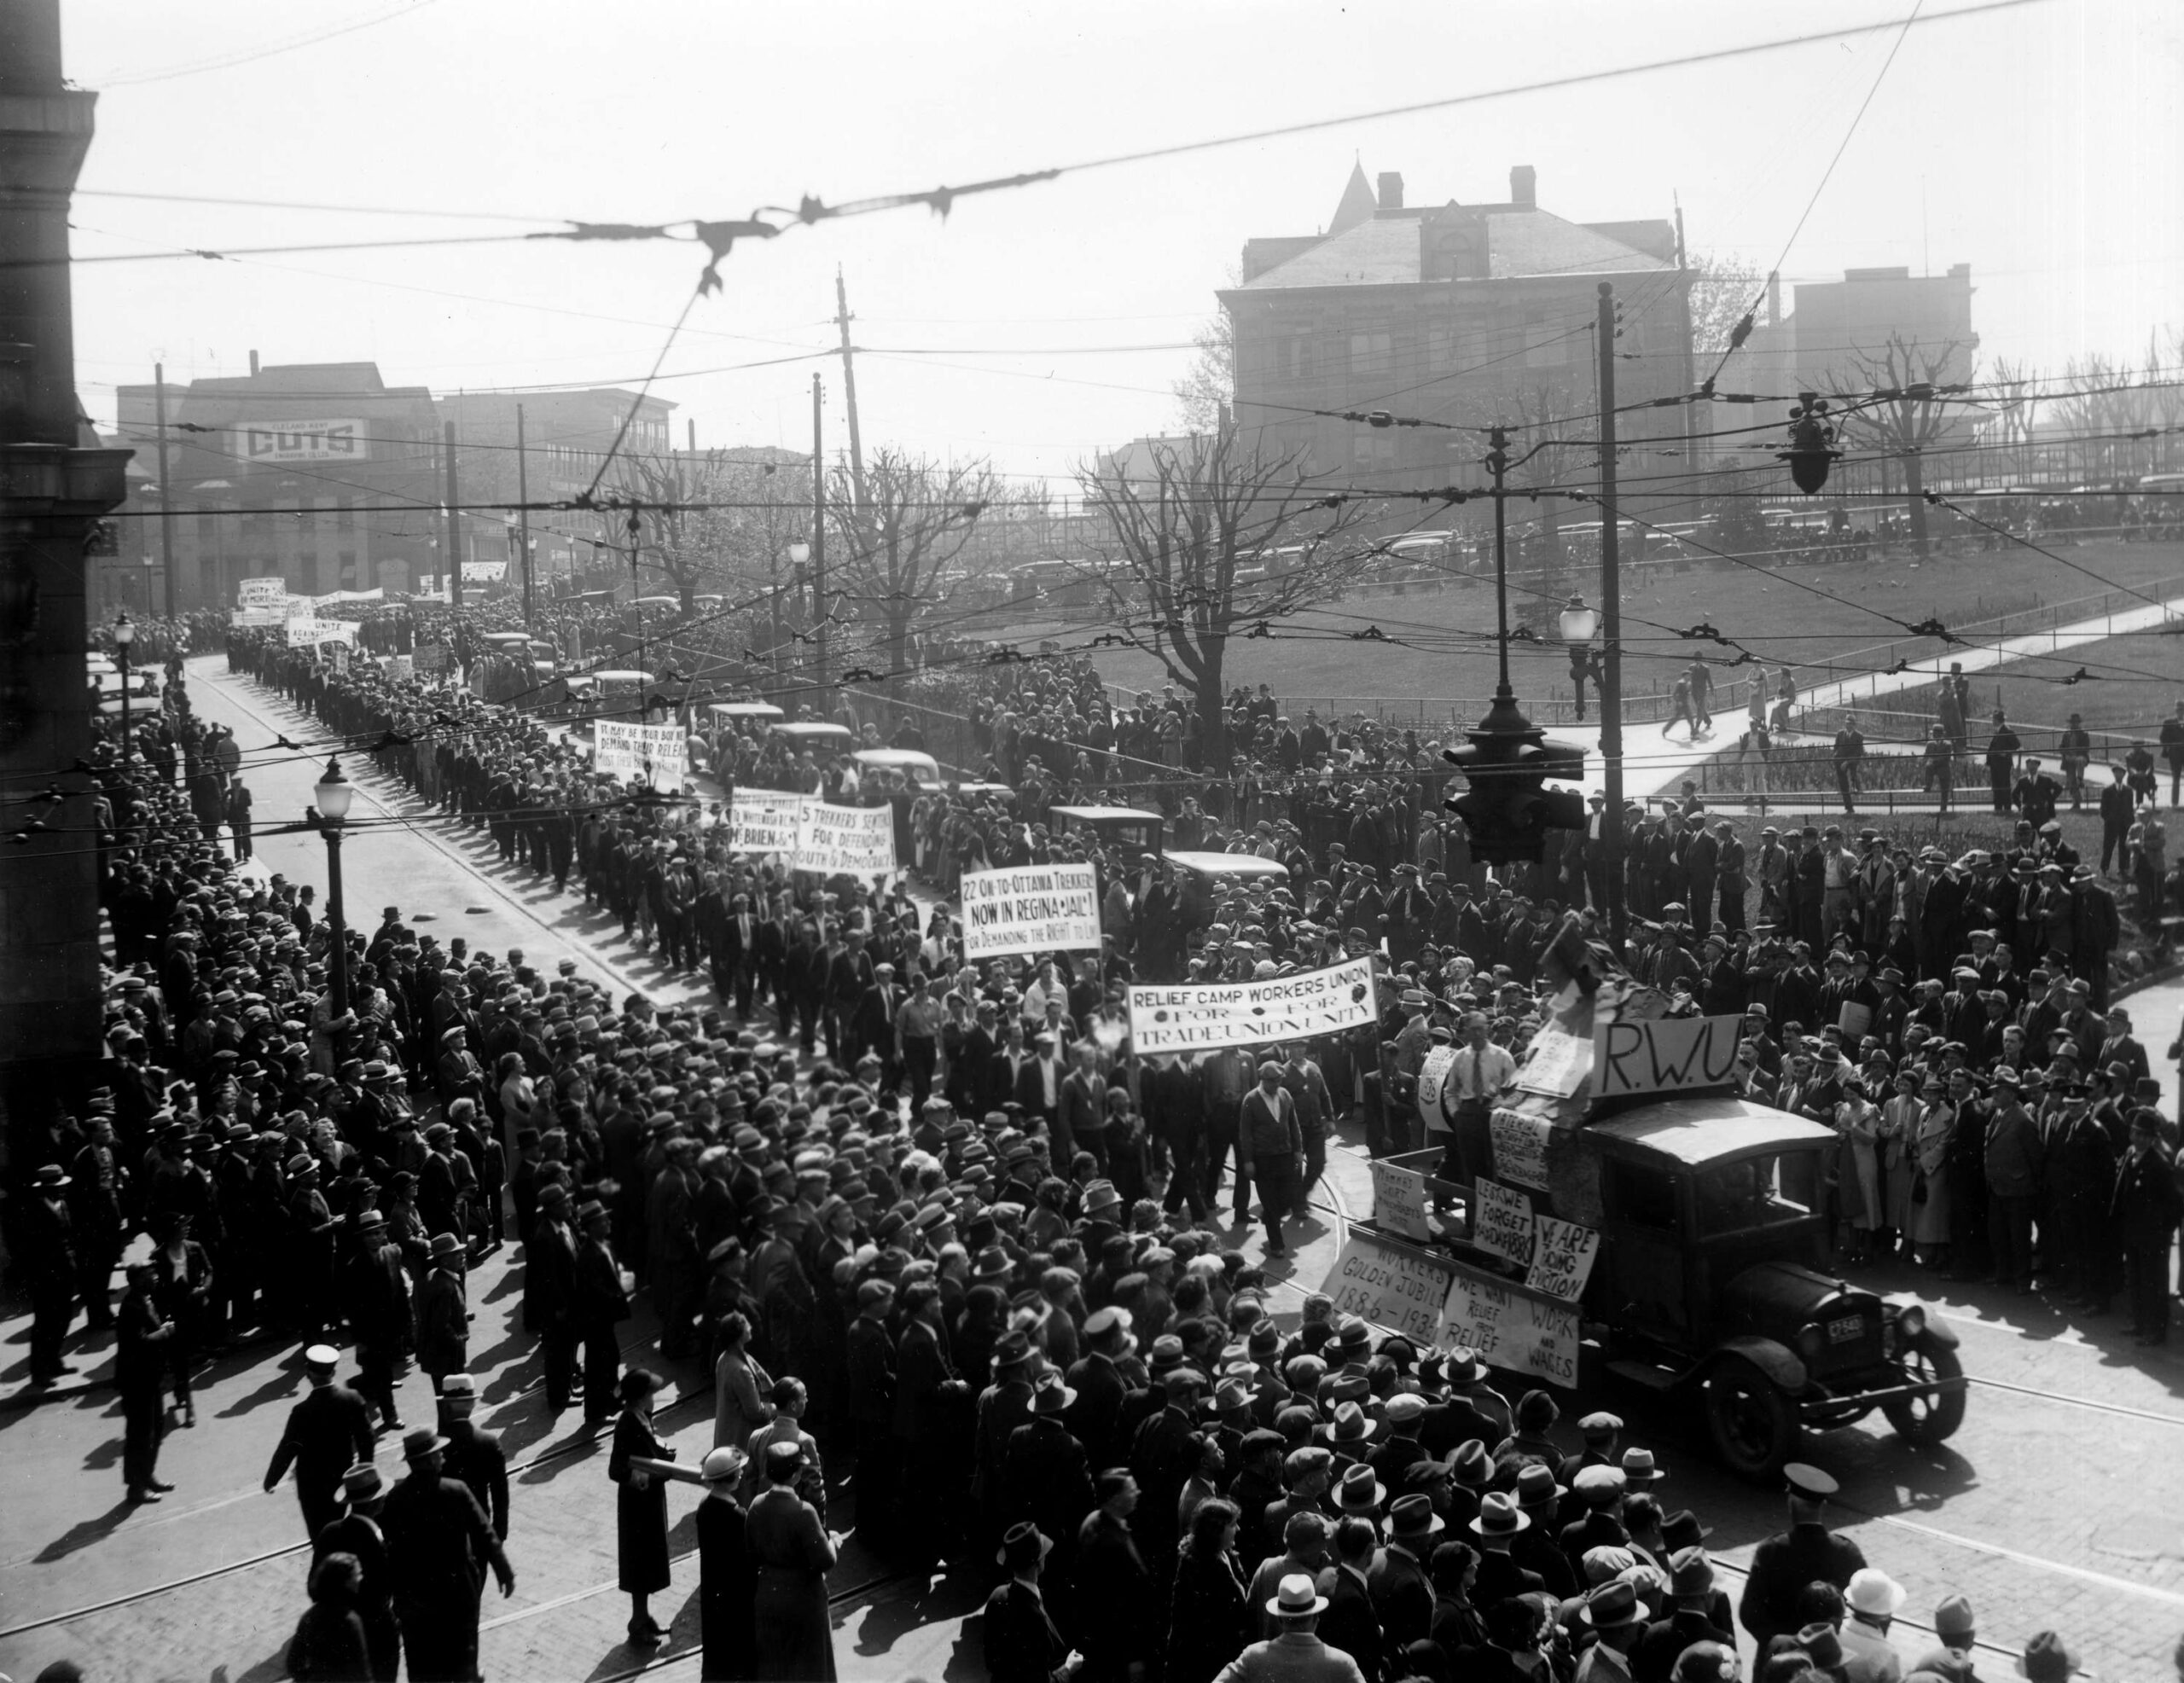 Relief Camp Workers Union at the United May Day Conference Parade demonstration, 1936. Reference code: VPD-S199-3---: CVA 417-9